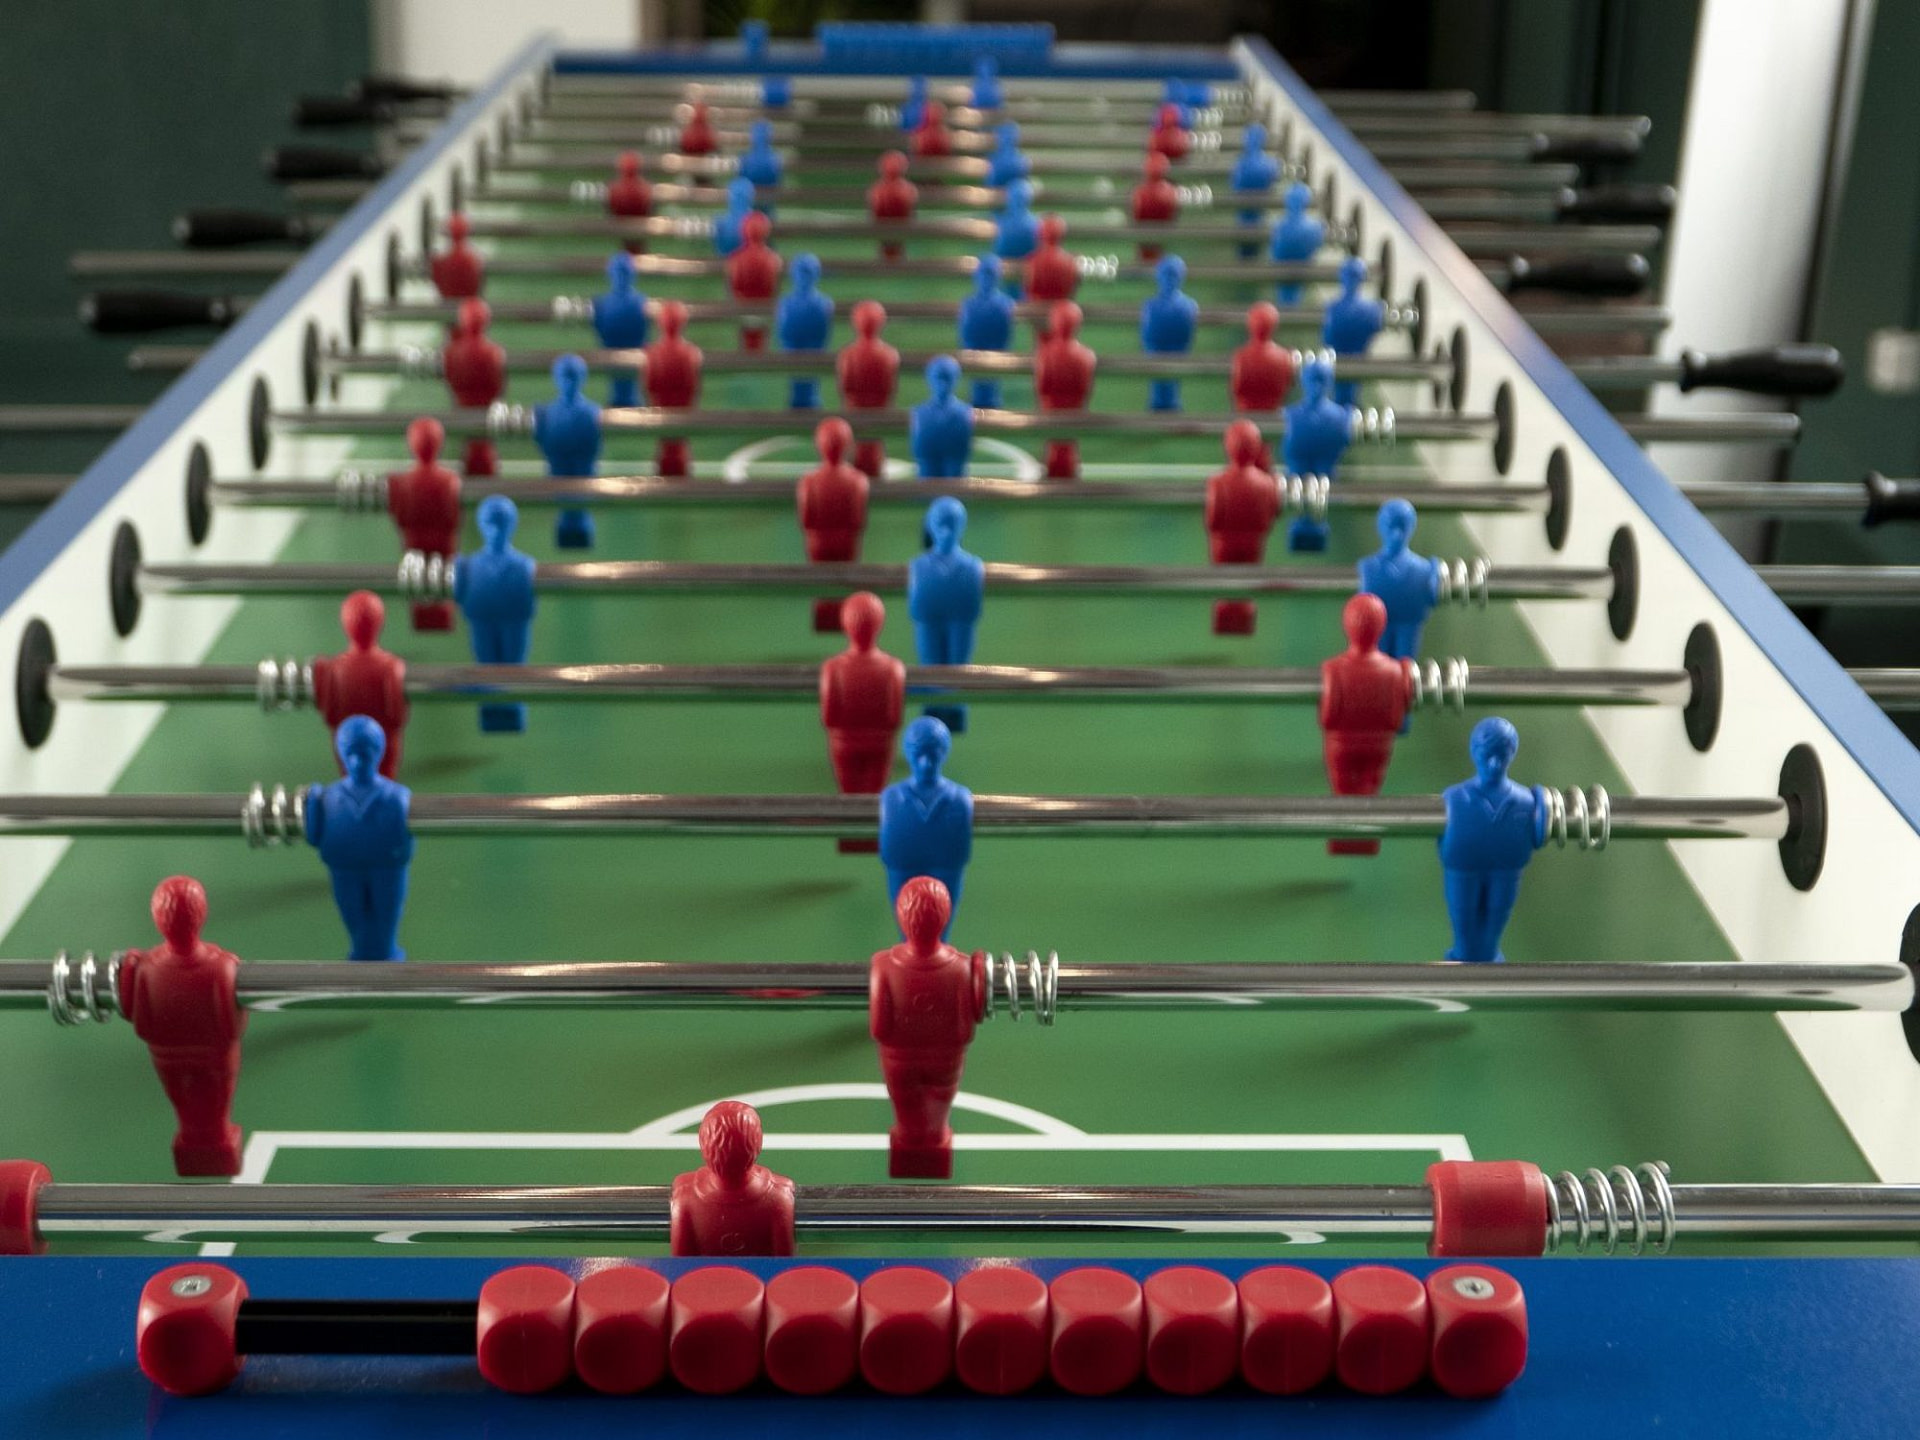 A high angle shot of a foosball game with blue and red figurines